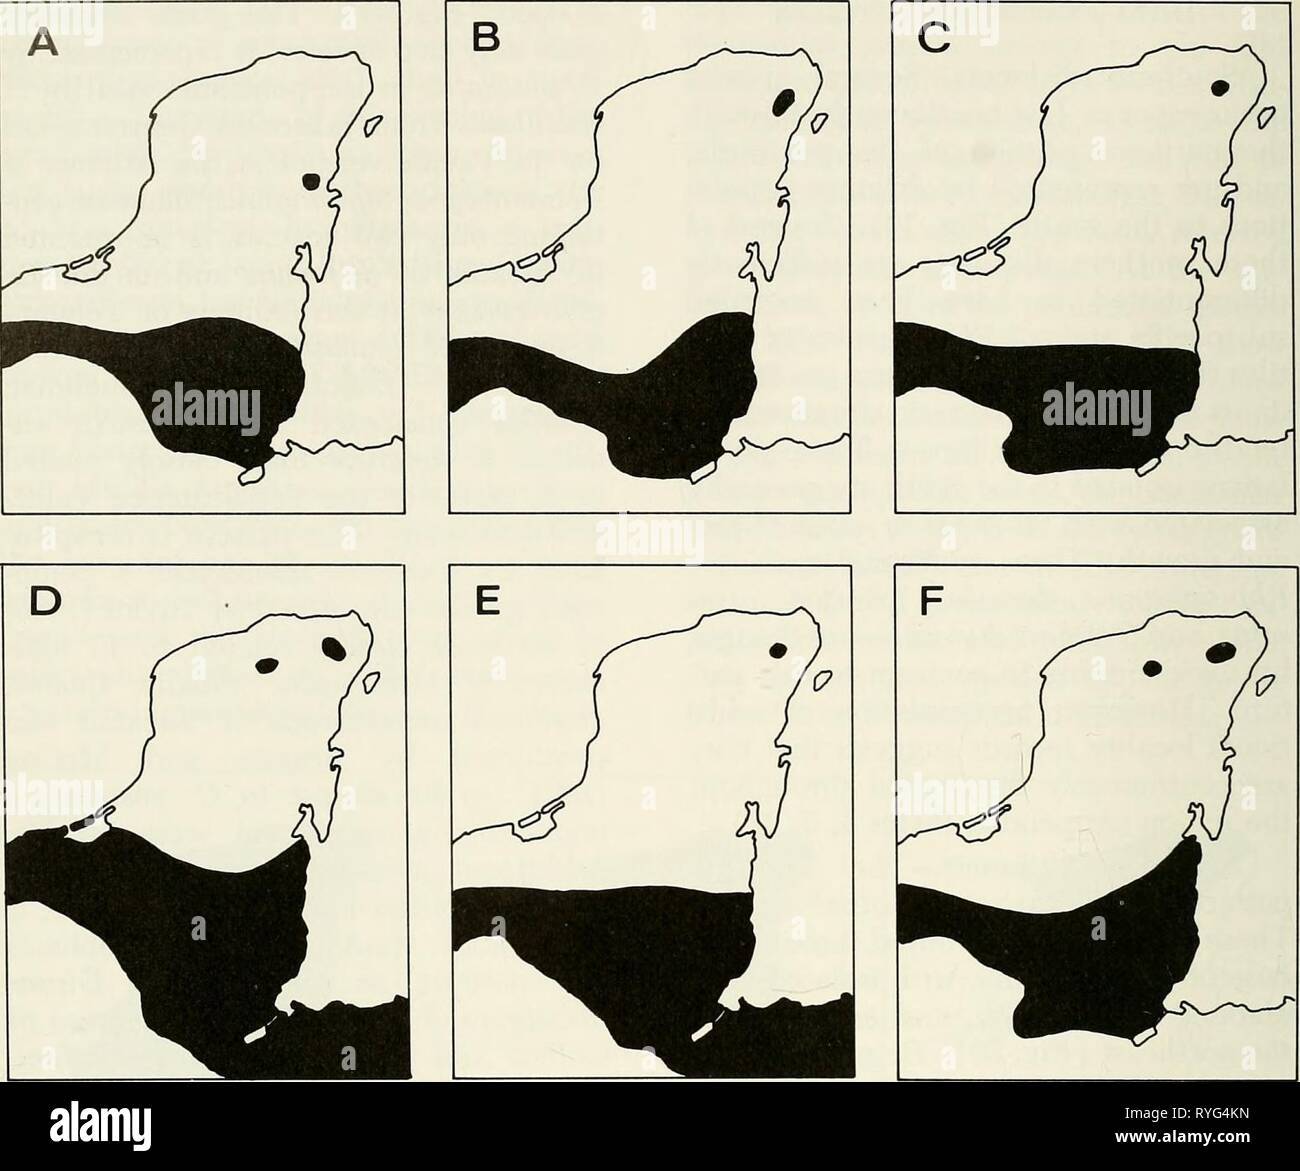 An ecogeographic analysis of the herpetofauna of the Yucatan Peninsula  ecogeographicana00leej Year: 1980  34 MISCELLANEOUS PUBLICATION MUSEUM OF NATURAL HISTORY    Fig. 20.—North peninsular disjuncts. Extra-peninsular distributions are rough approximations. A. Hyla ehraccata. B. Conjtophanes hernandezi. C. Eumeces sumichrasti. D. Sphenomorphus cher- riei. E. Dendrophidion vinitor. F. Scaphiodontophis annidatus. the afBnities of the peninsular foim he with the population on the Pacific ver- sant, then the species represents, in mod- ified form, an example of the Yucatan- West Mexico pattern. T Stock Photo